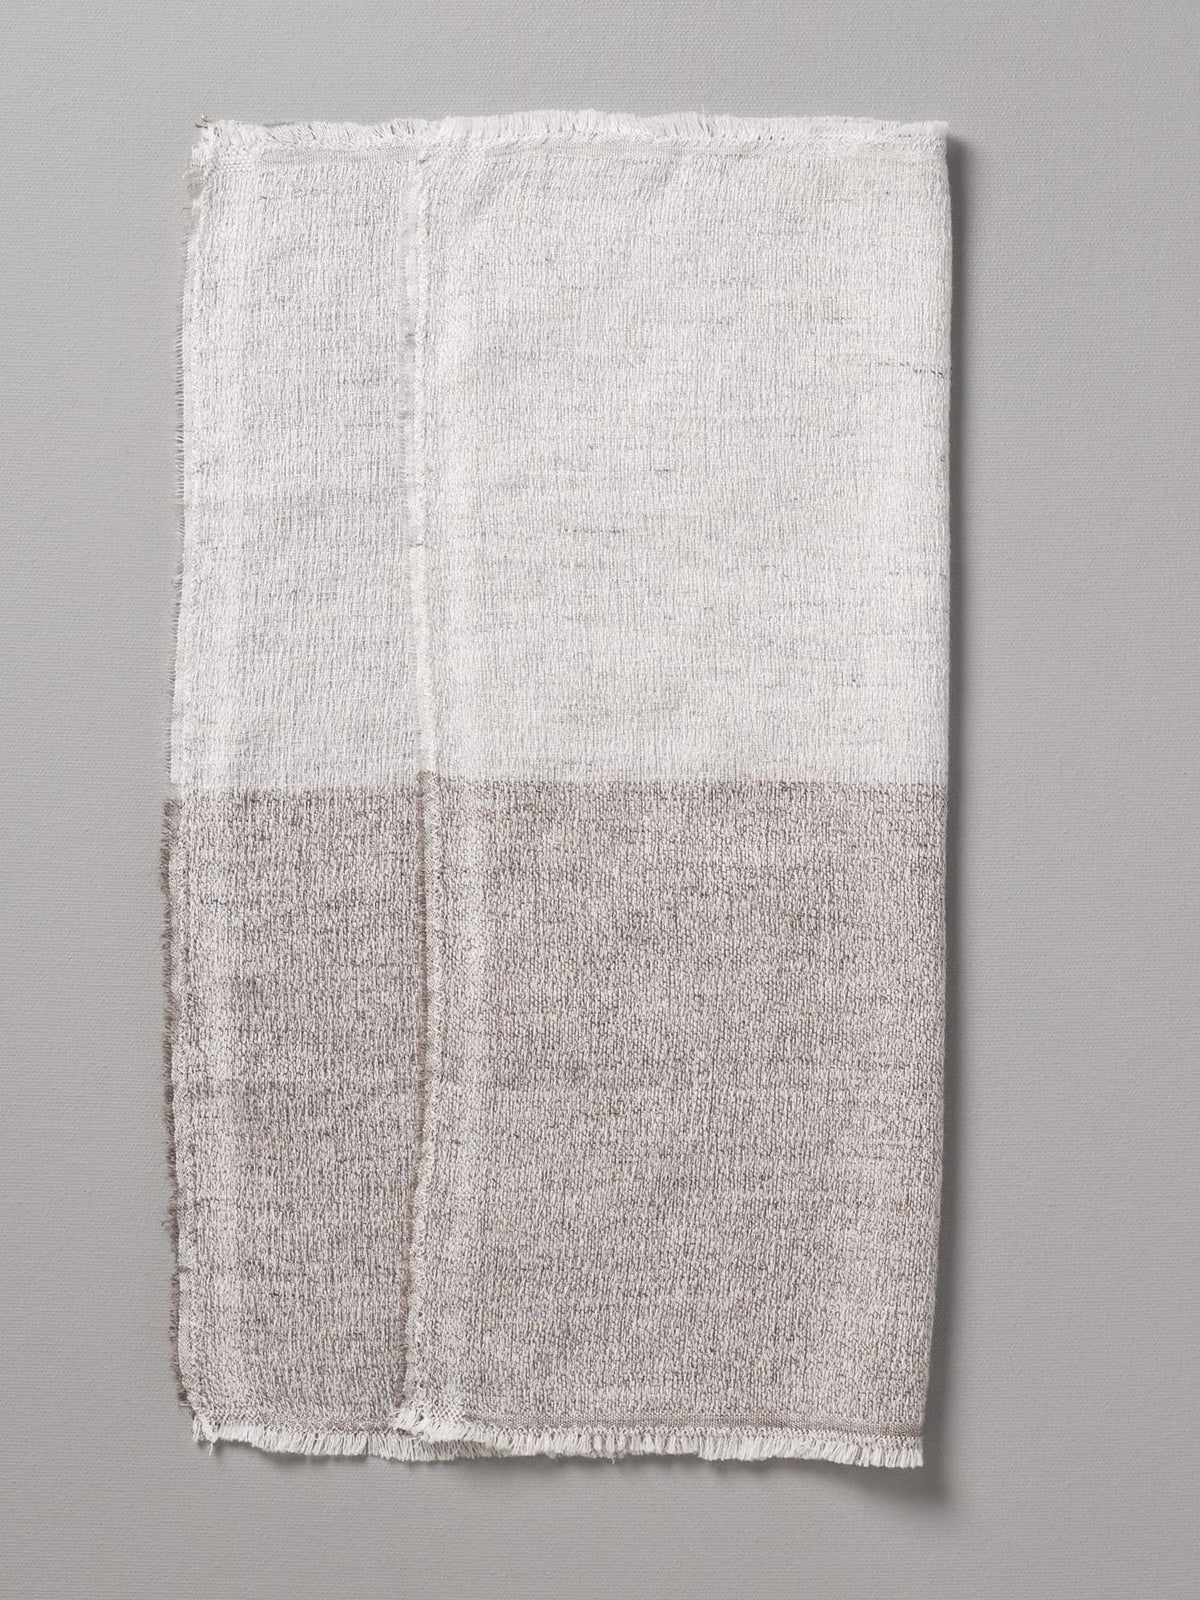 Two-toned linen Kontex Shukin Towel with frayed edges displayed on a grey background, made in Imabari.